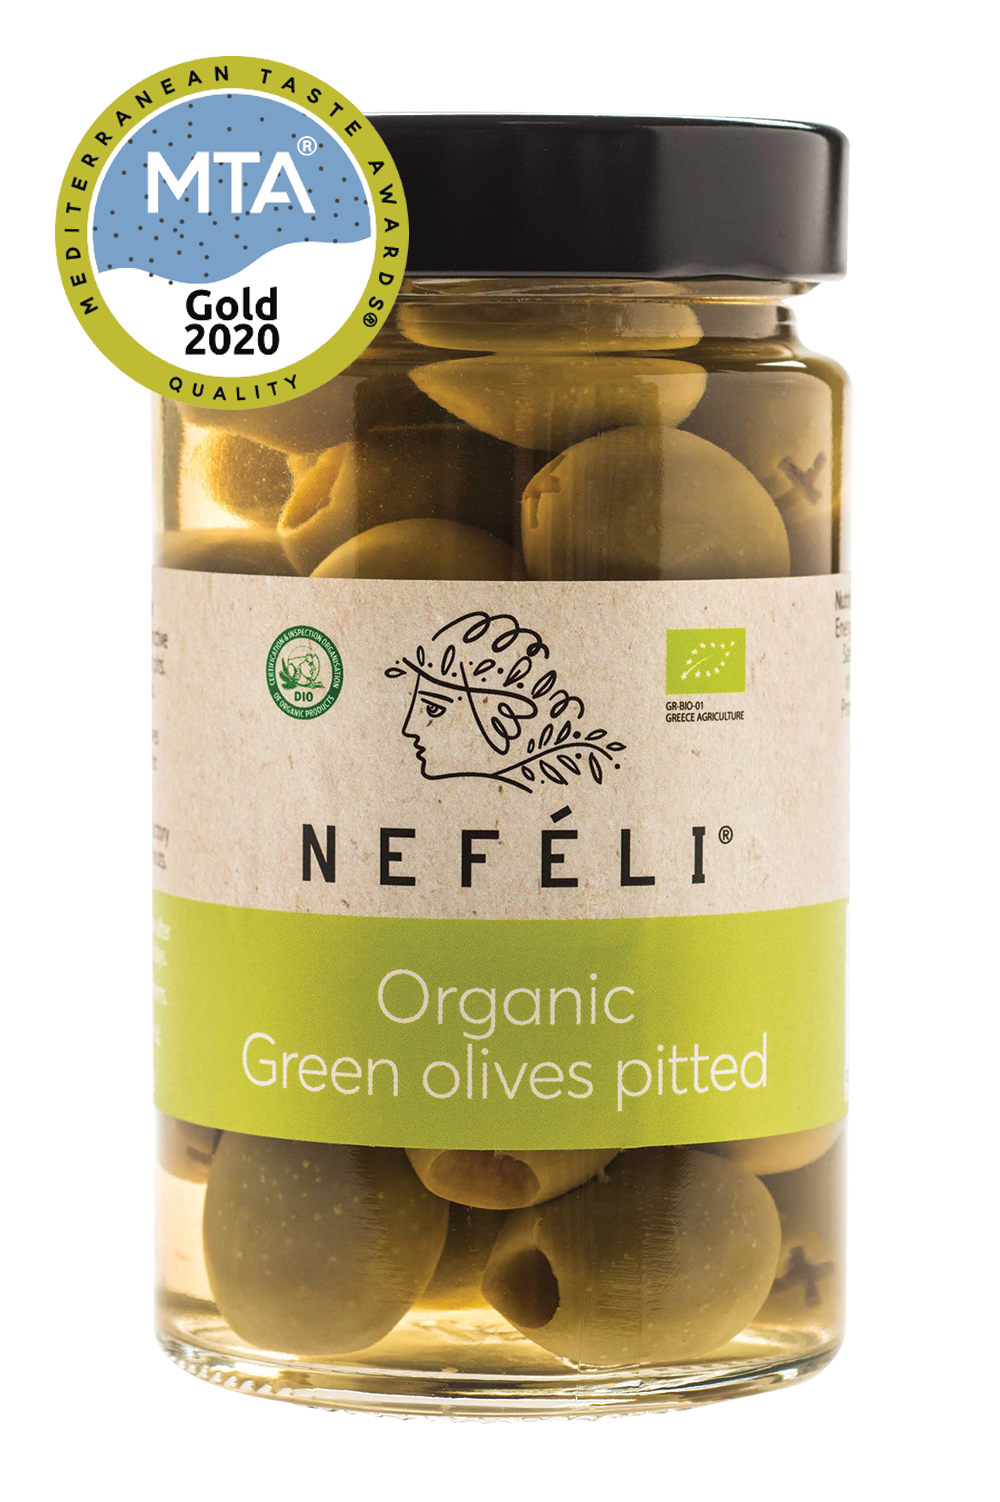 Organic Green olives pitted